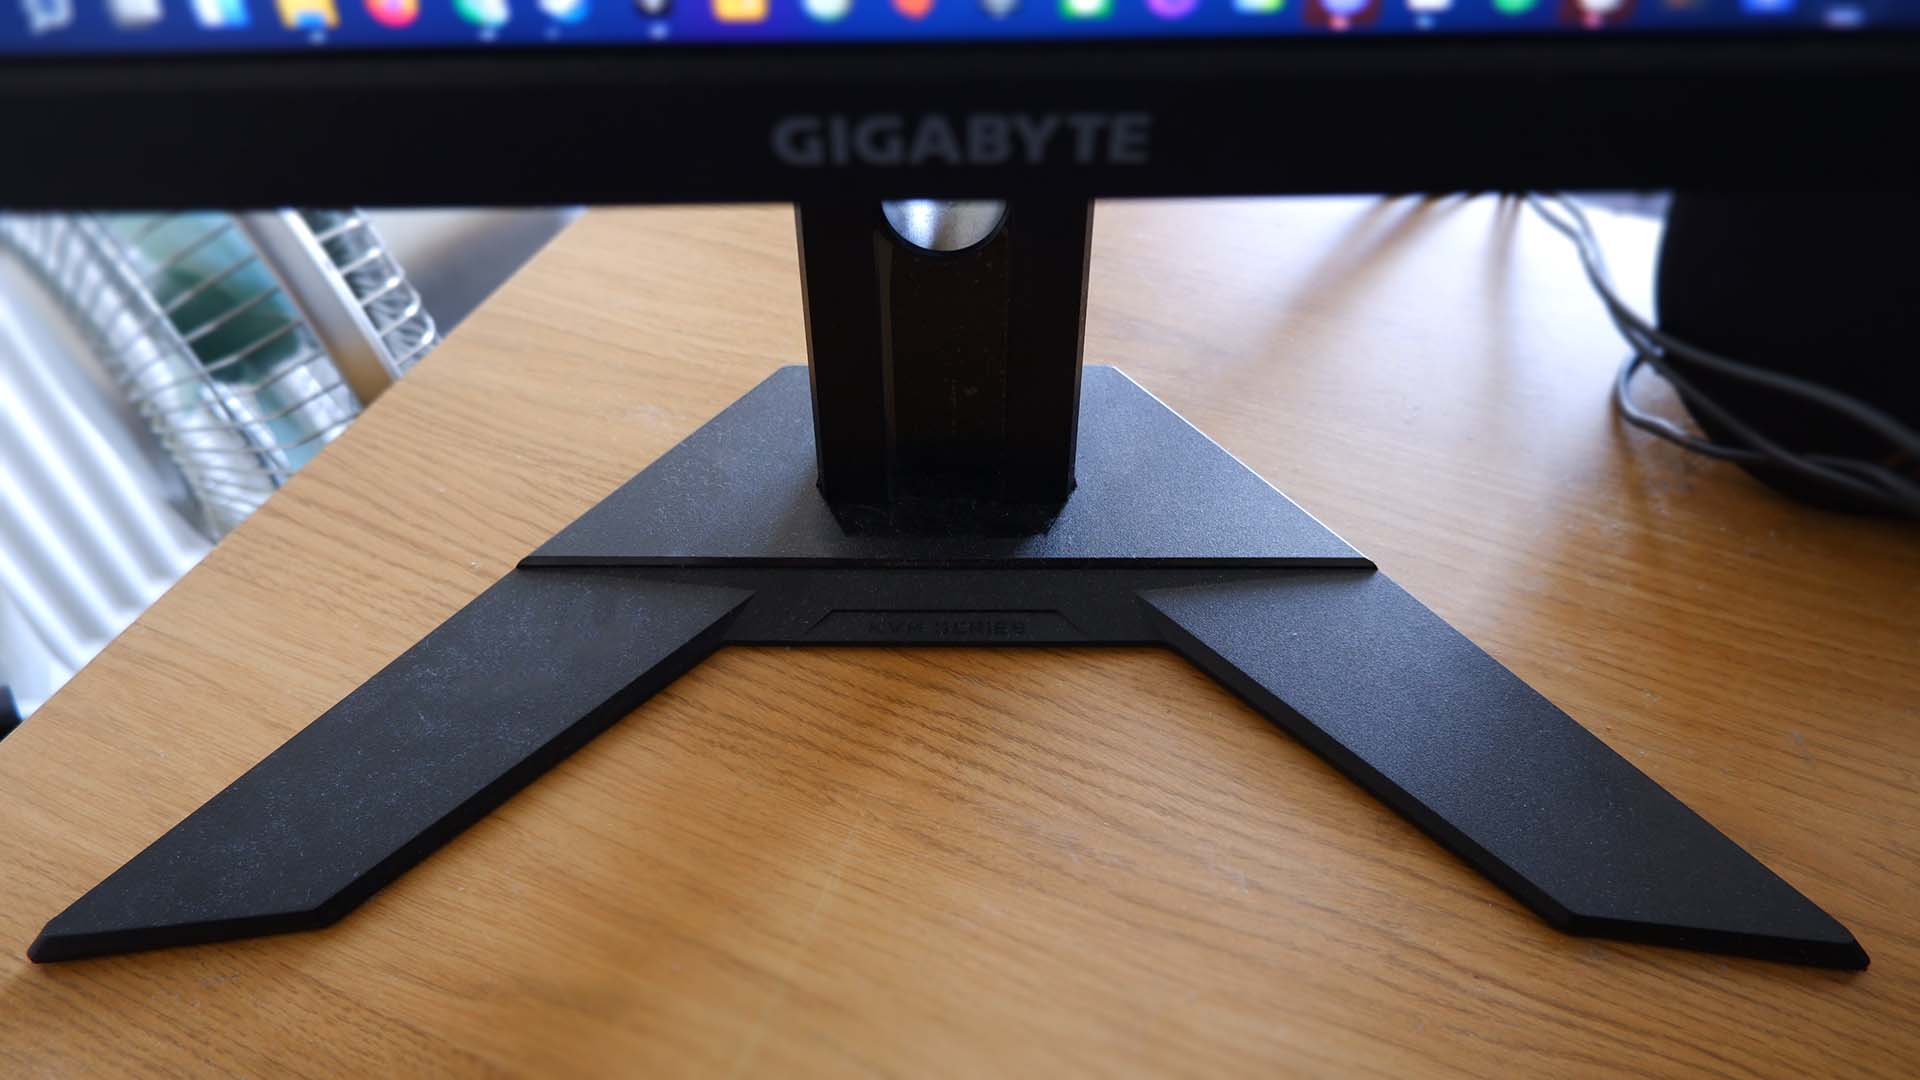 Gigabyte M28U gaming monitor pictured on a desk